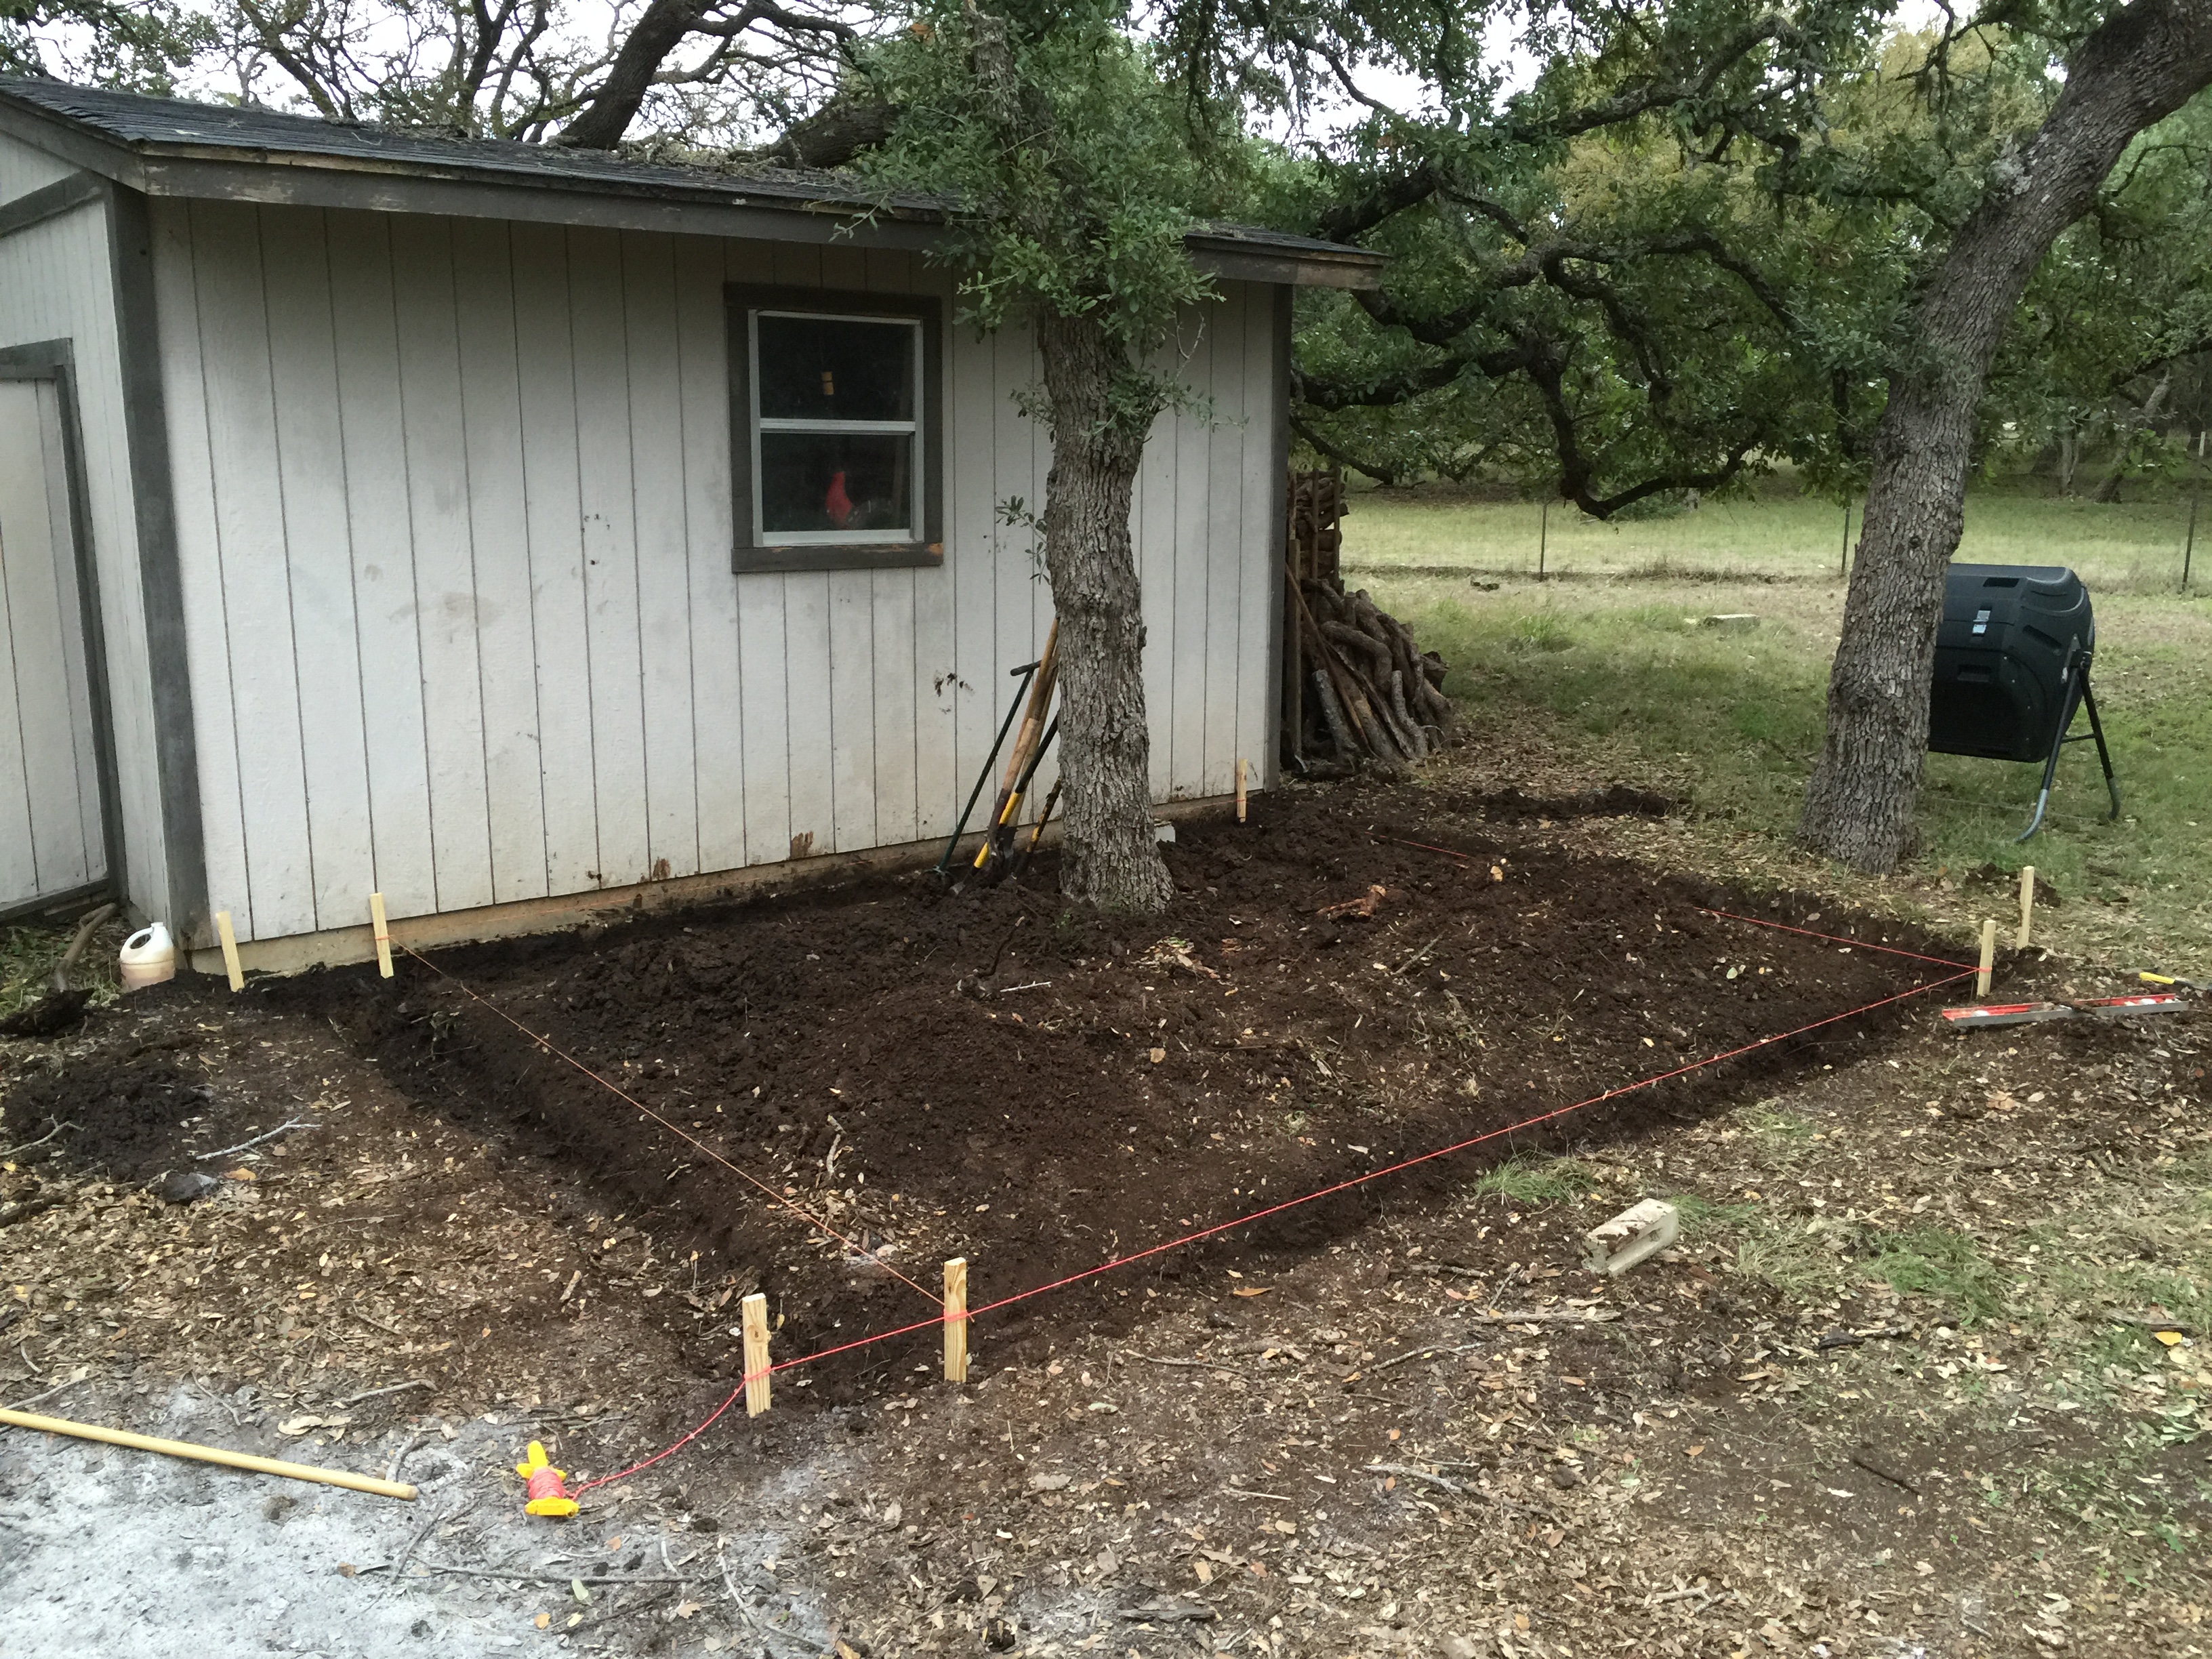 We started by measuring out and trenching right next to the tool shed.  This would be the ideal place to build the coop and run, as it was within viewing distance from the back windows of the house.  The footprint ended up being around 12' x 14'.  We dug about 10" into hard Texas black clay to make room for the cinder blocks that would go in for the foundation.  Notice that we intentionally left the oak tree running right through the middle of the run area.